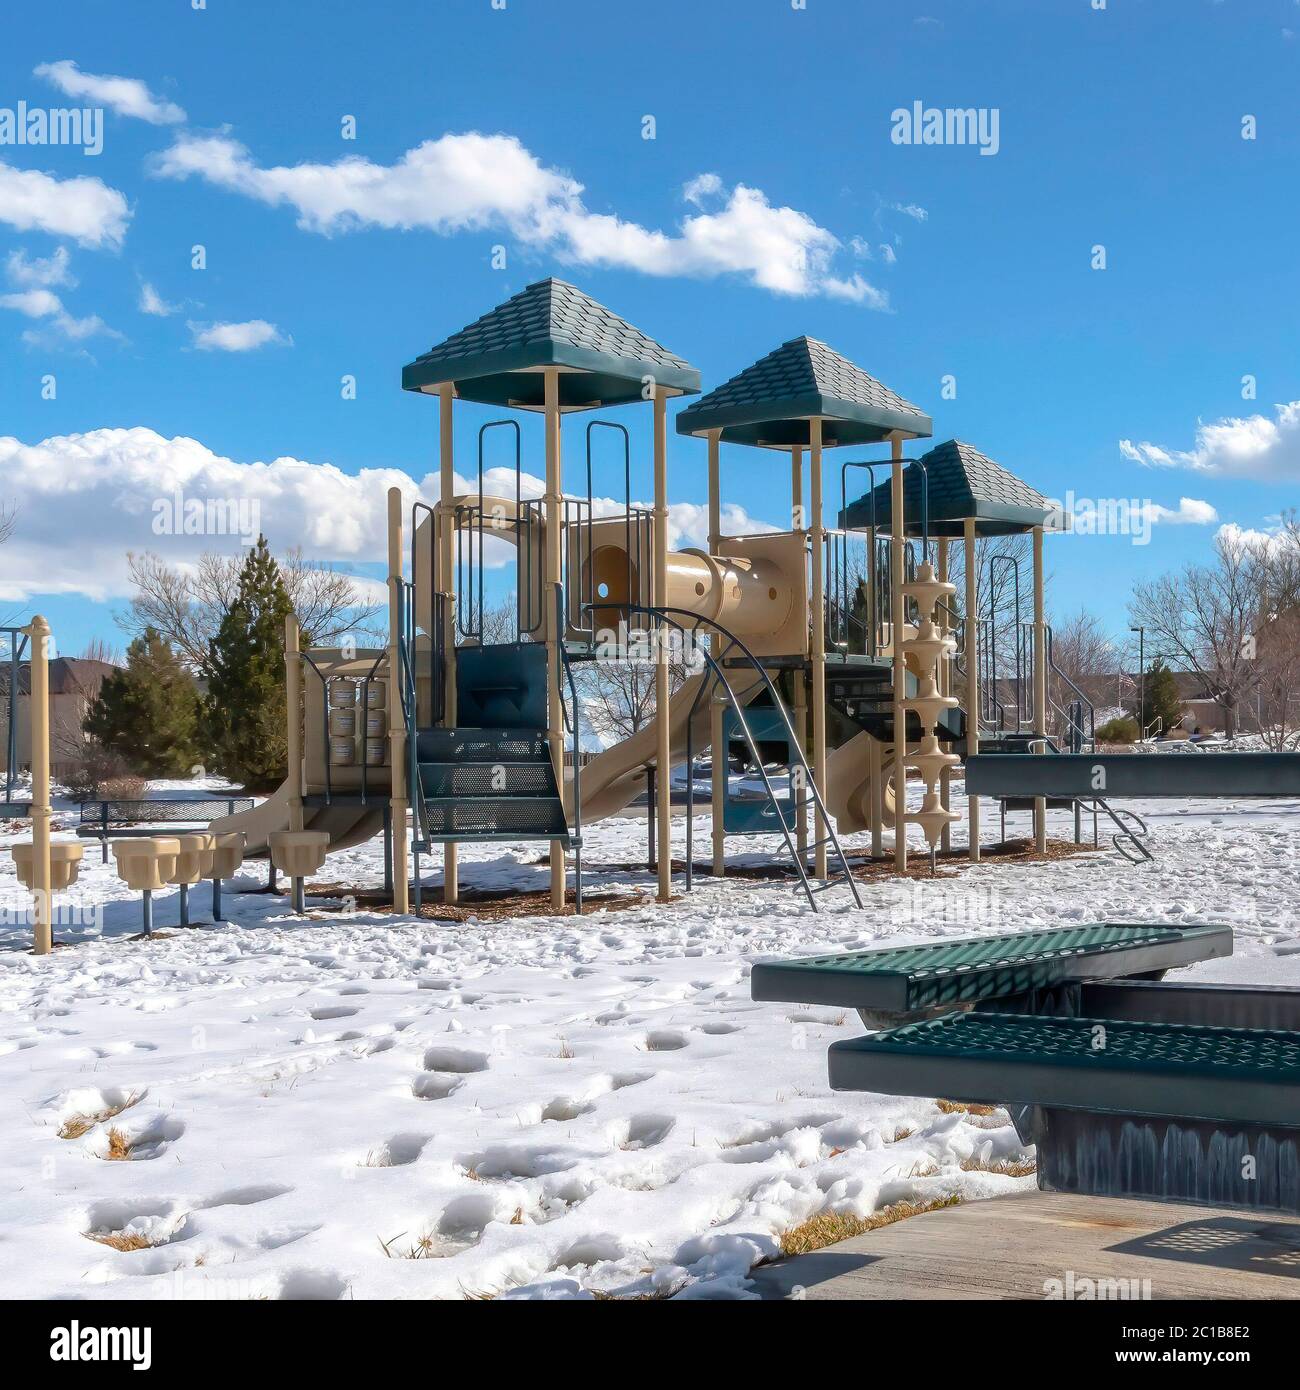 Square Playground and picnic table with footprints on the snow covered ground in winter Stock Photo